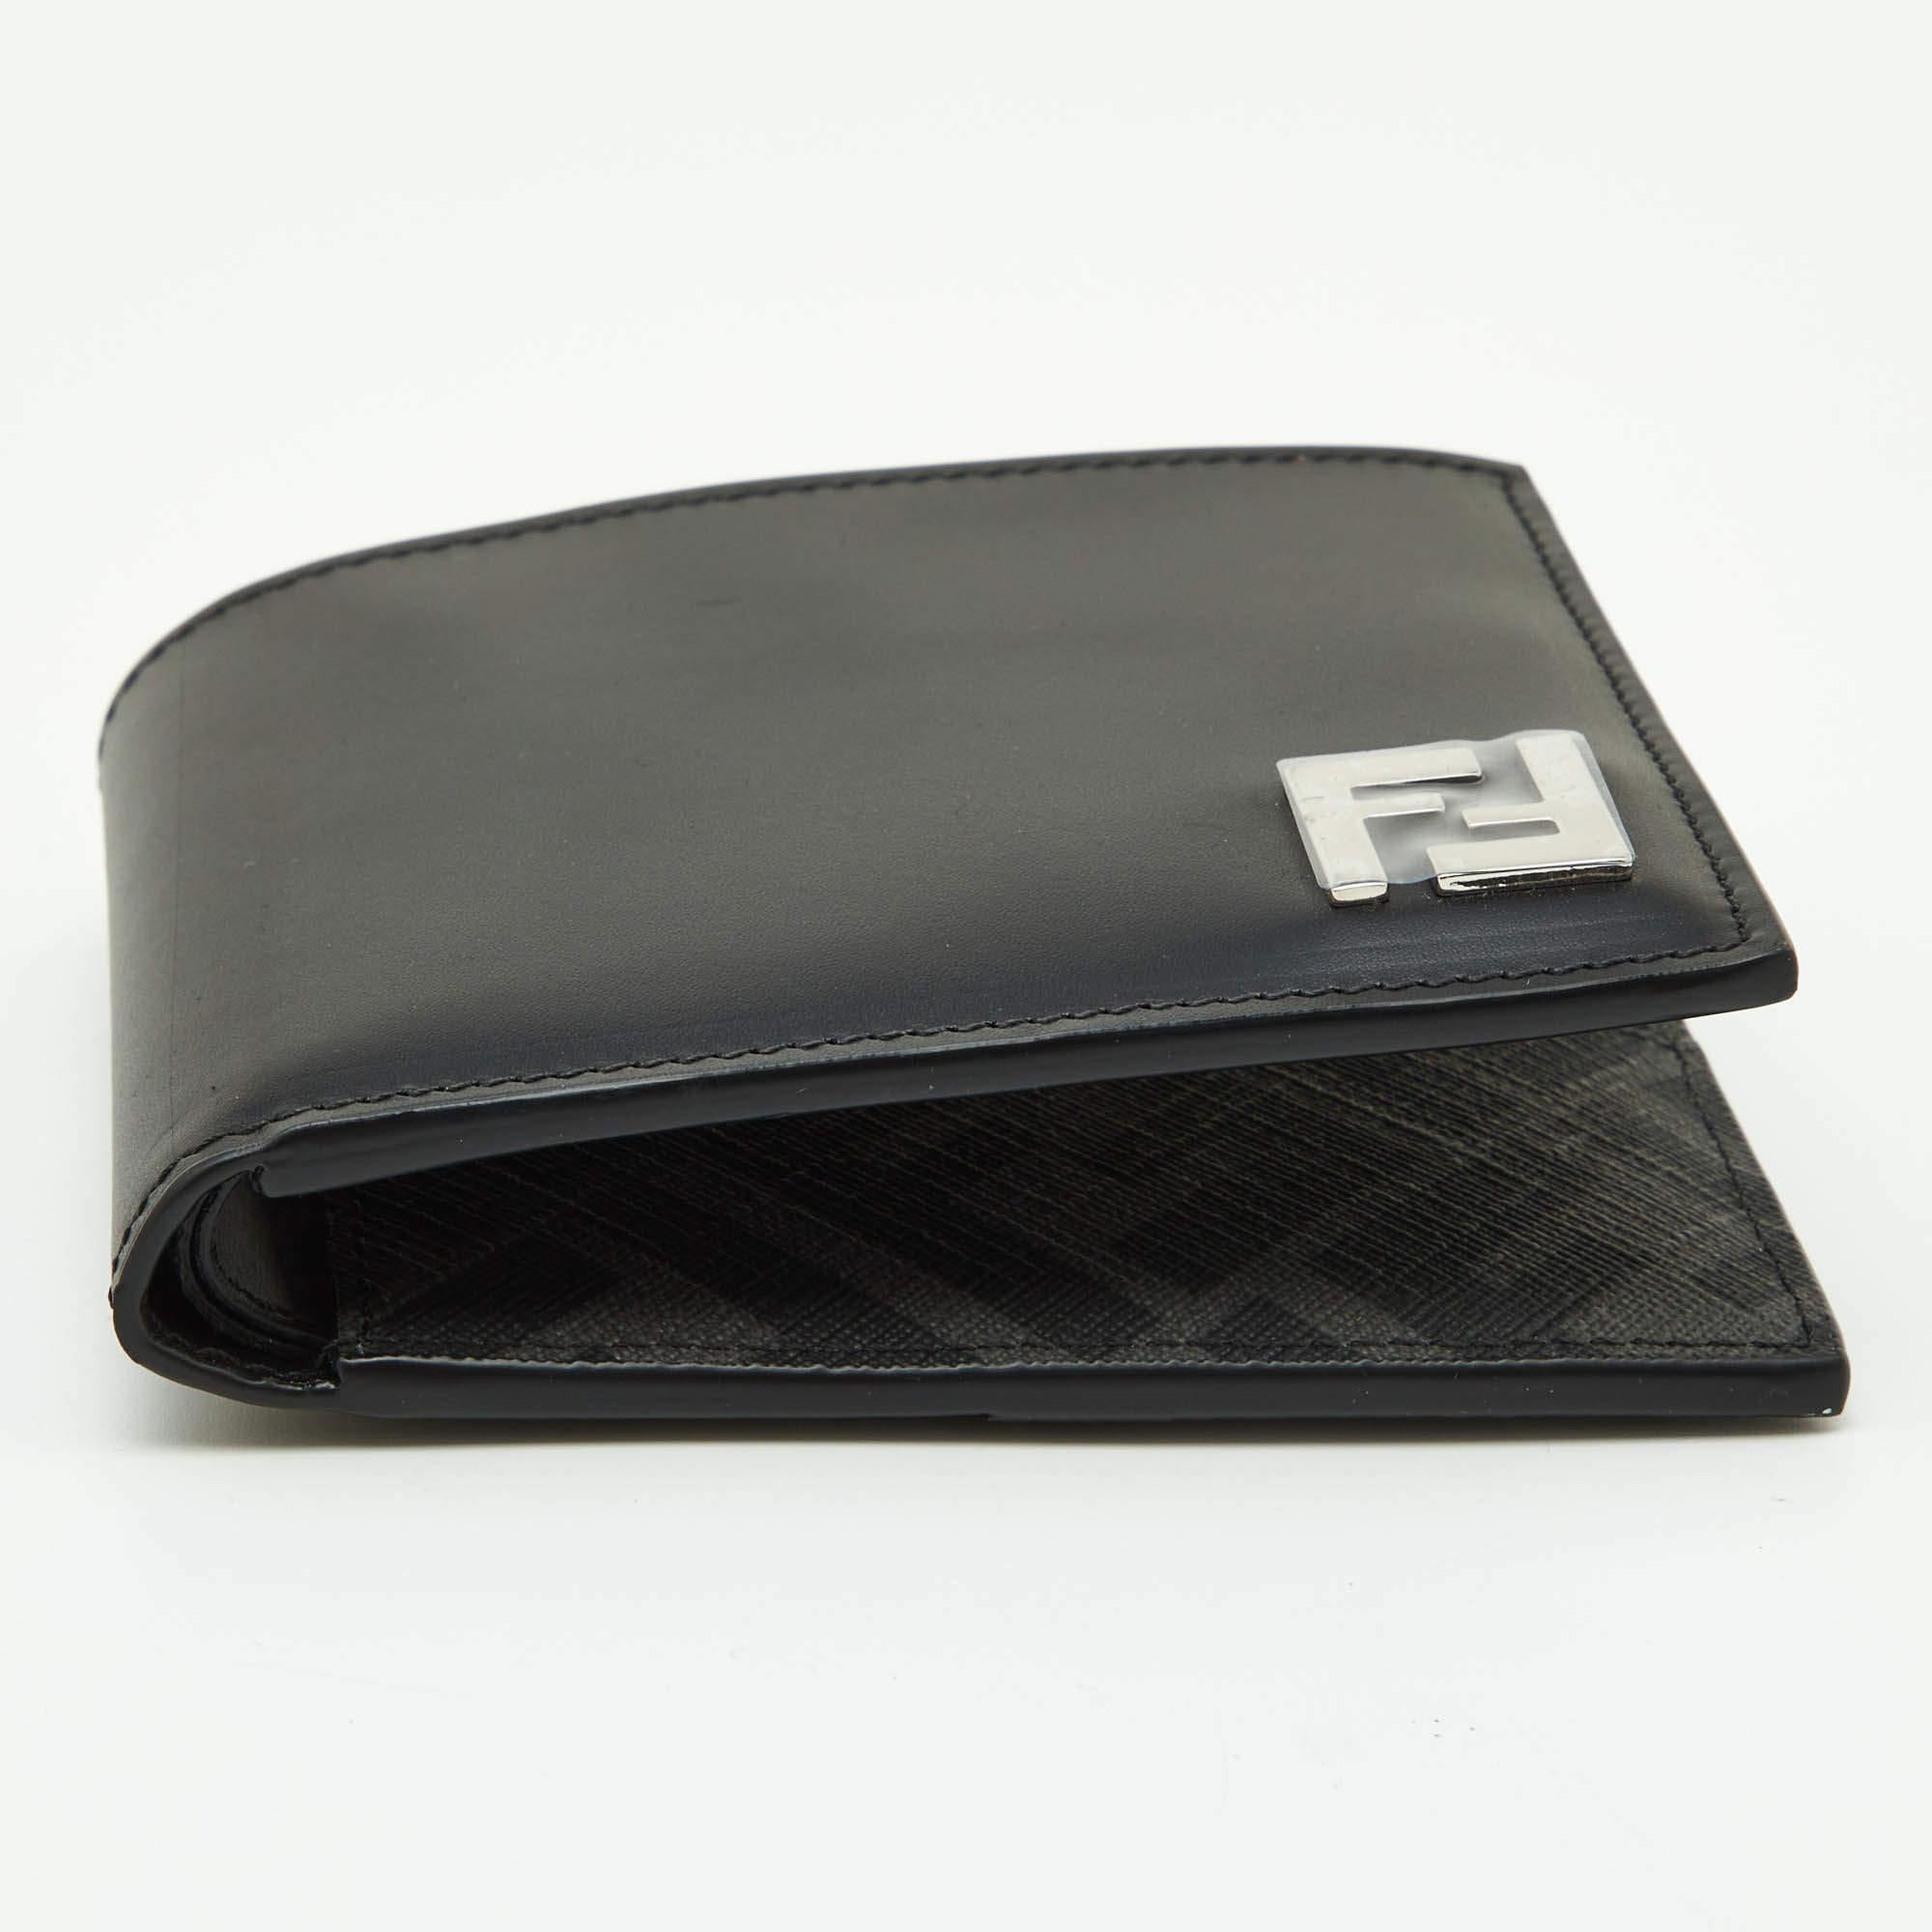 This classy Fendi wallet for men brings along a touch of luxury and immense style. It comes perfectly crafted to neatly carry your cards and cash.

